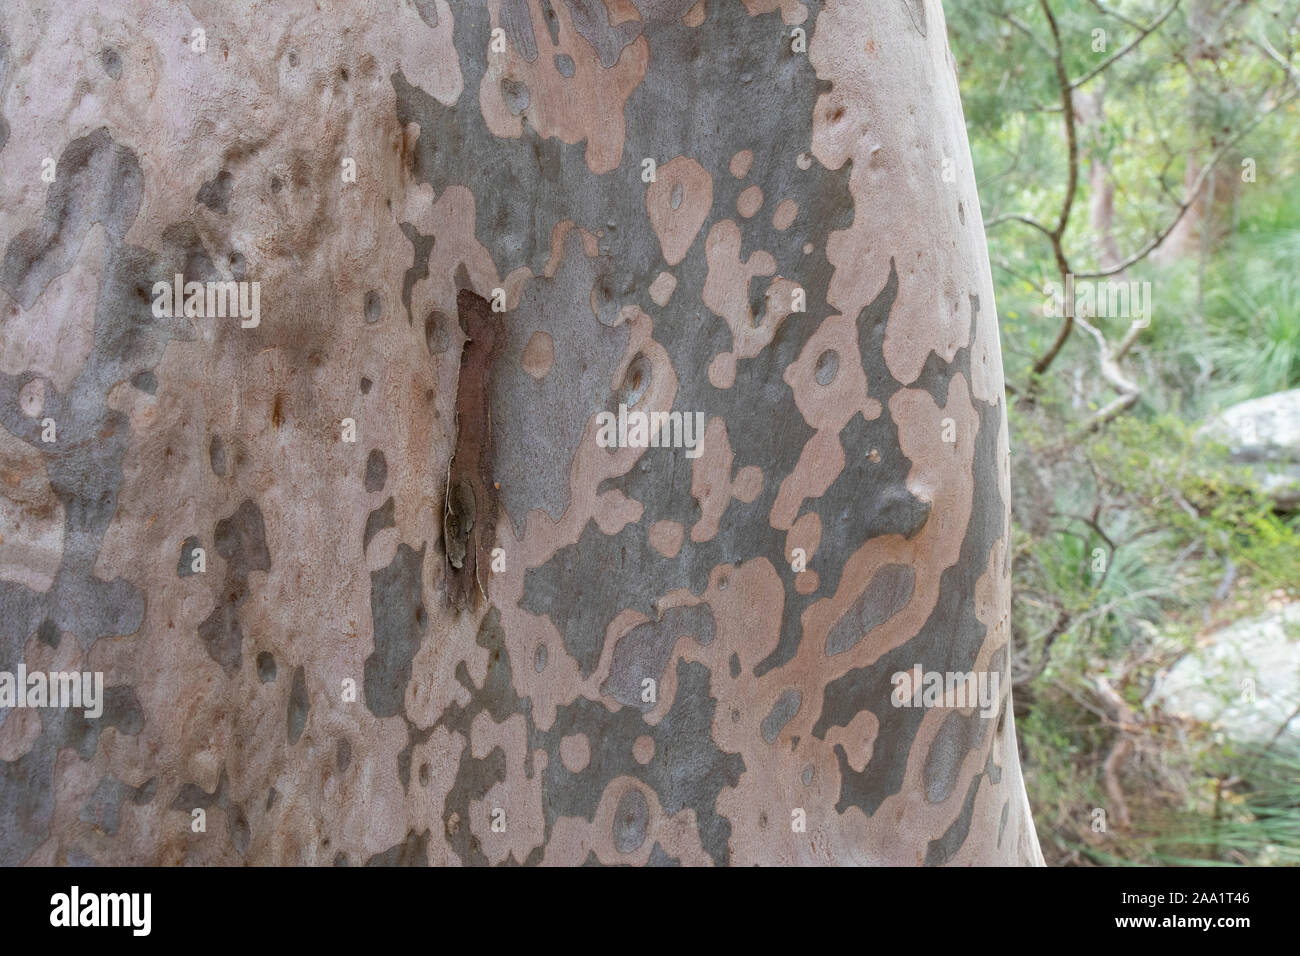 Bark patterns on an Angophora costata, a common woodland and forest tree of Eastern Australia. Closely related to eucalytpus, this species is also com Stock Photo